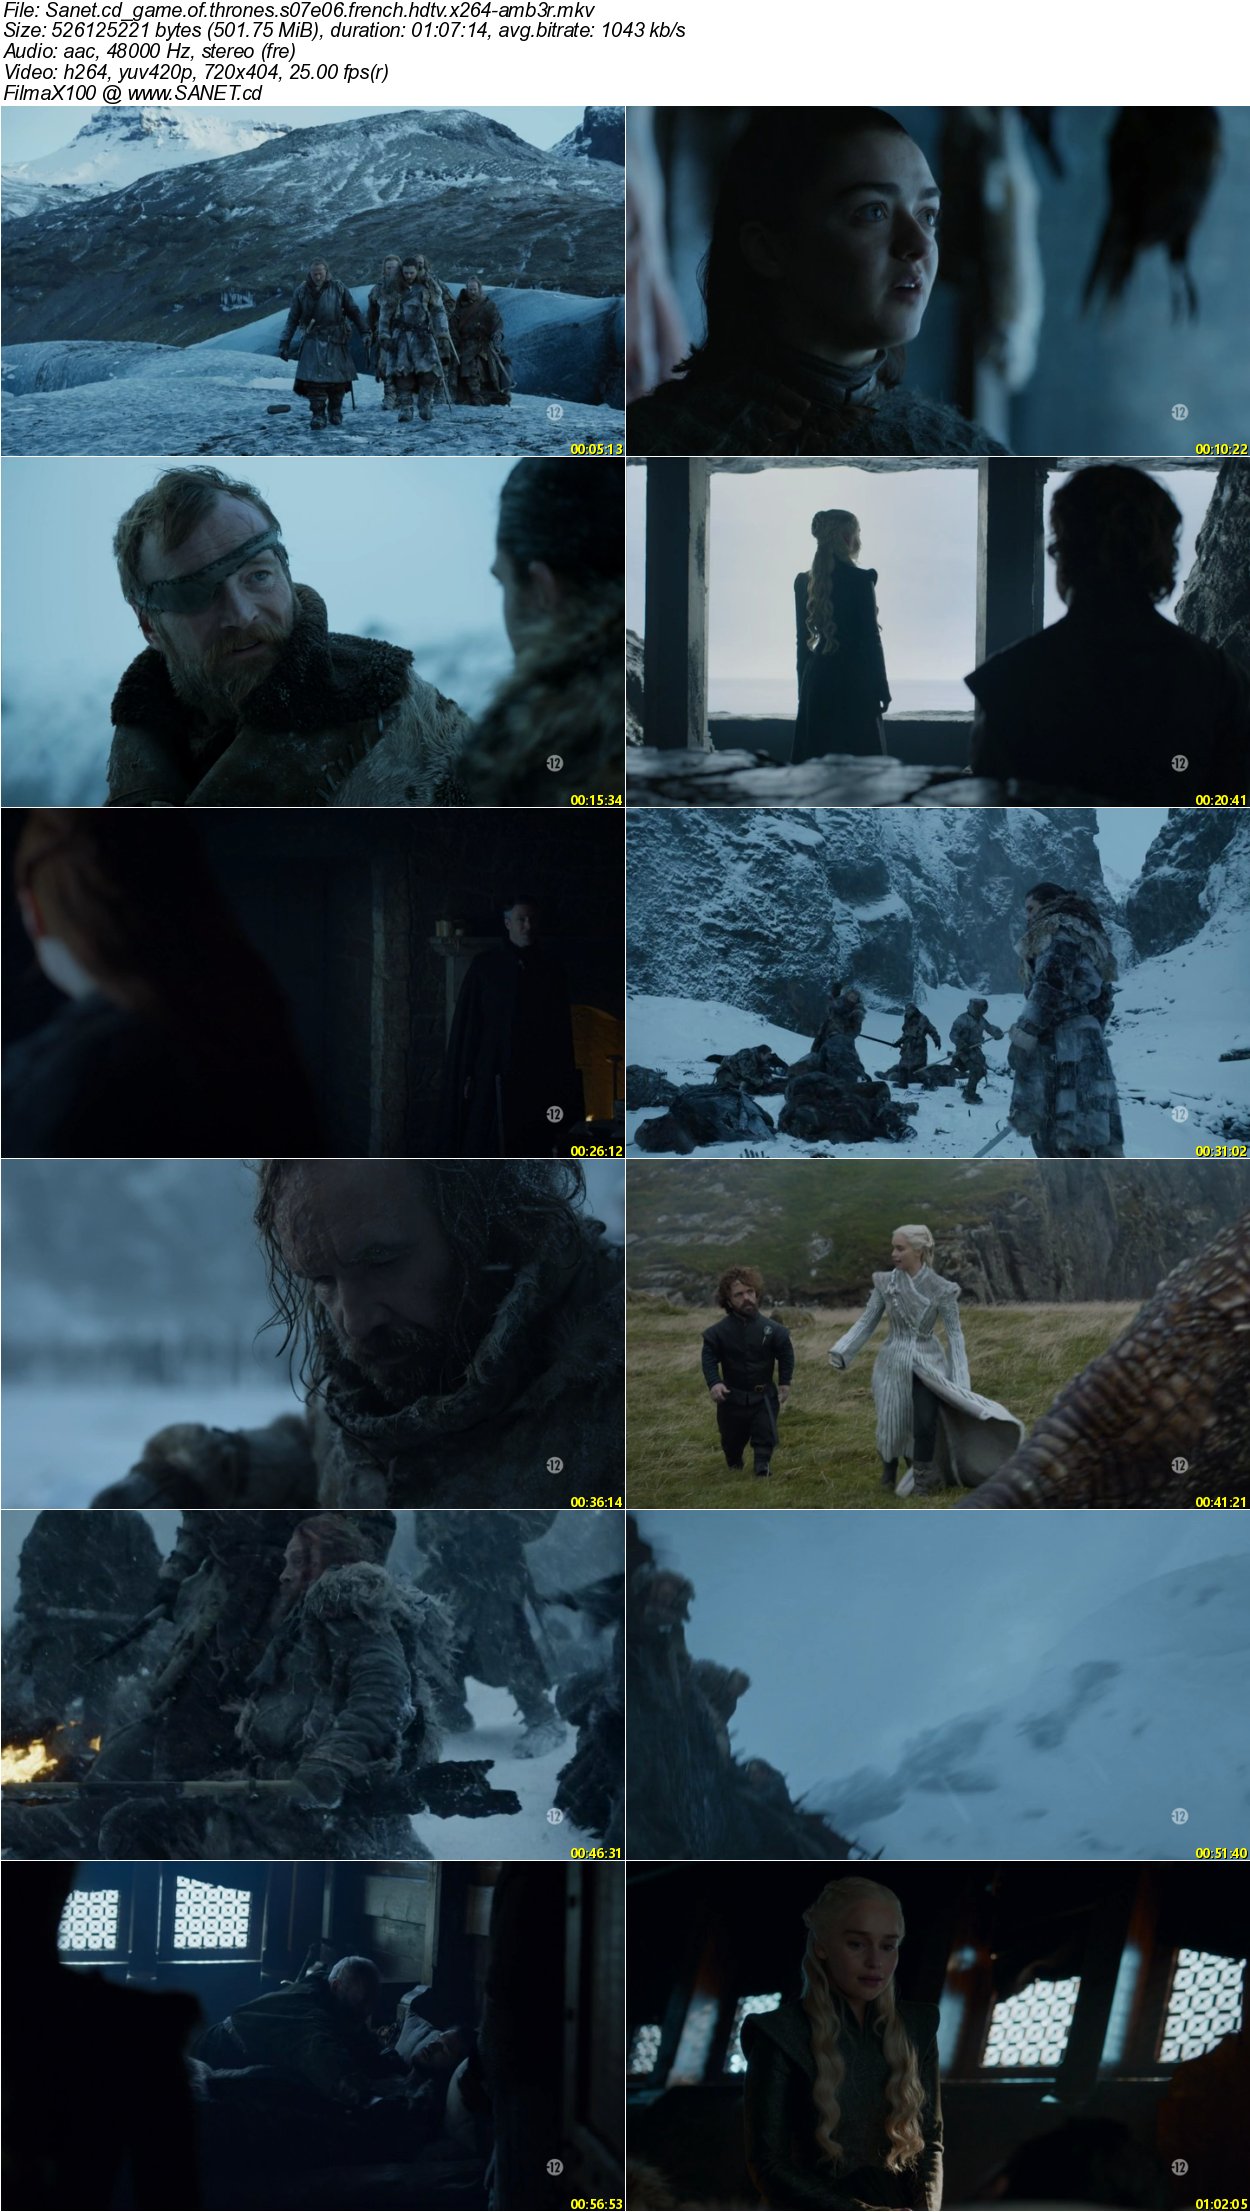 Download game of thrones s07e06 kickass full